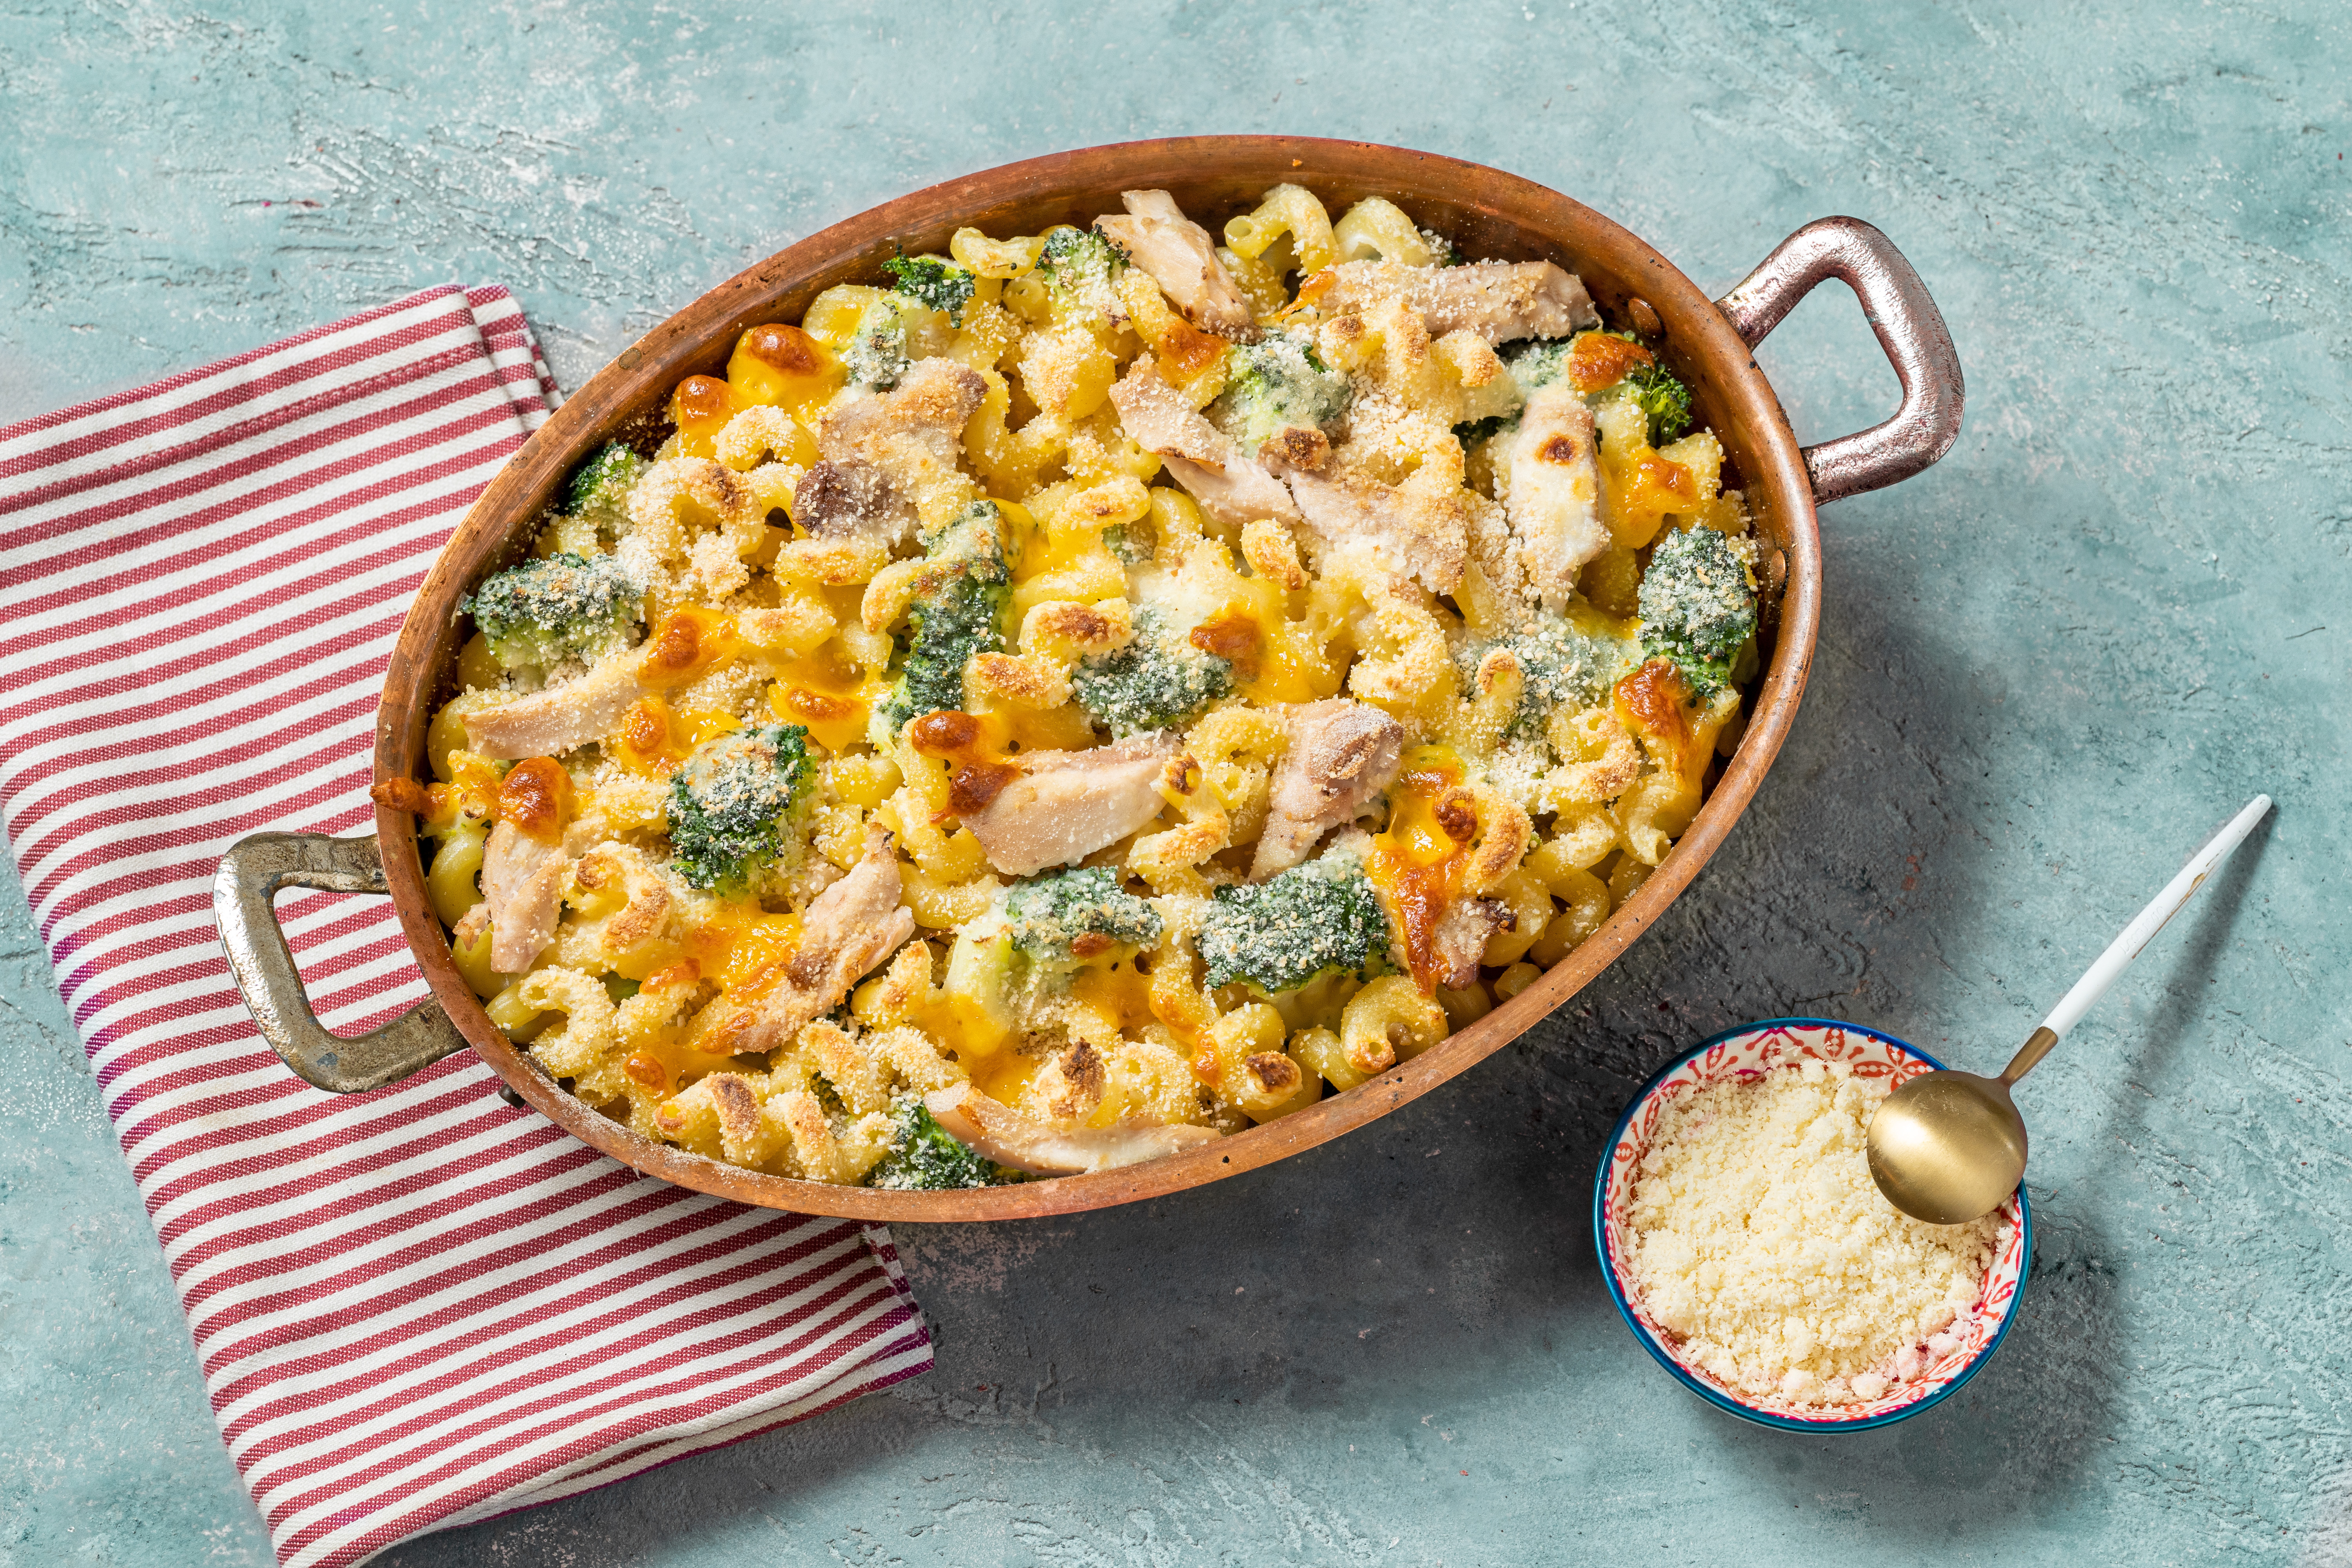 Healthy Casseroles Your Whole Family Will Love - Eating Bird Food